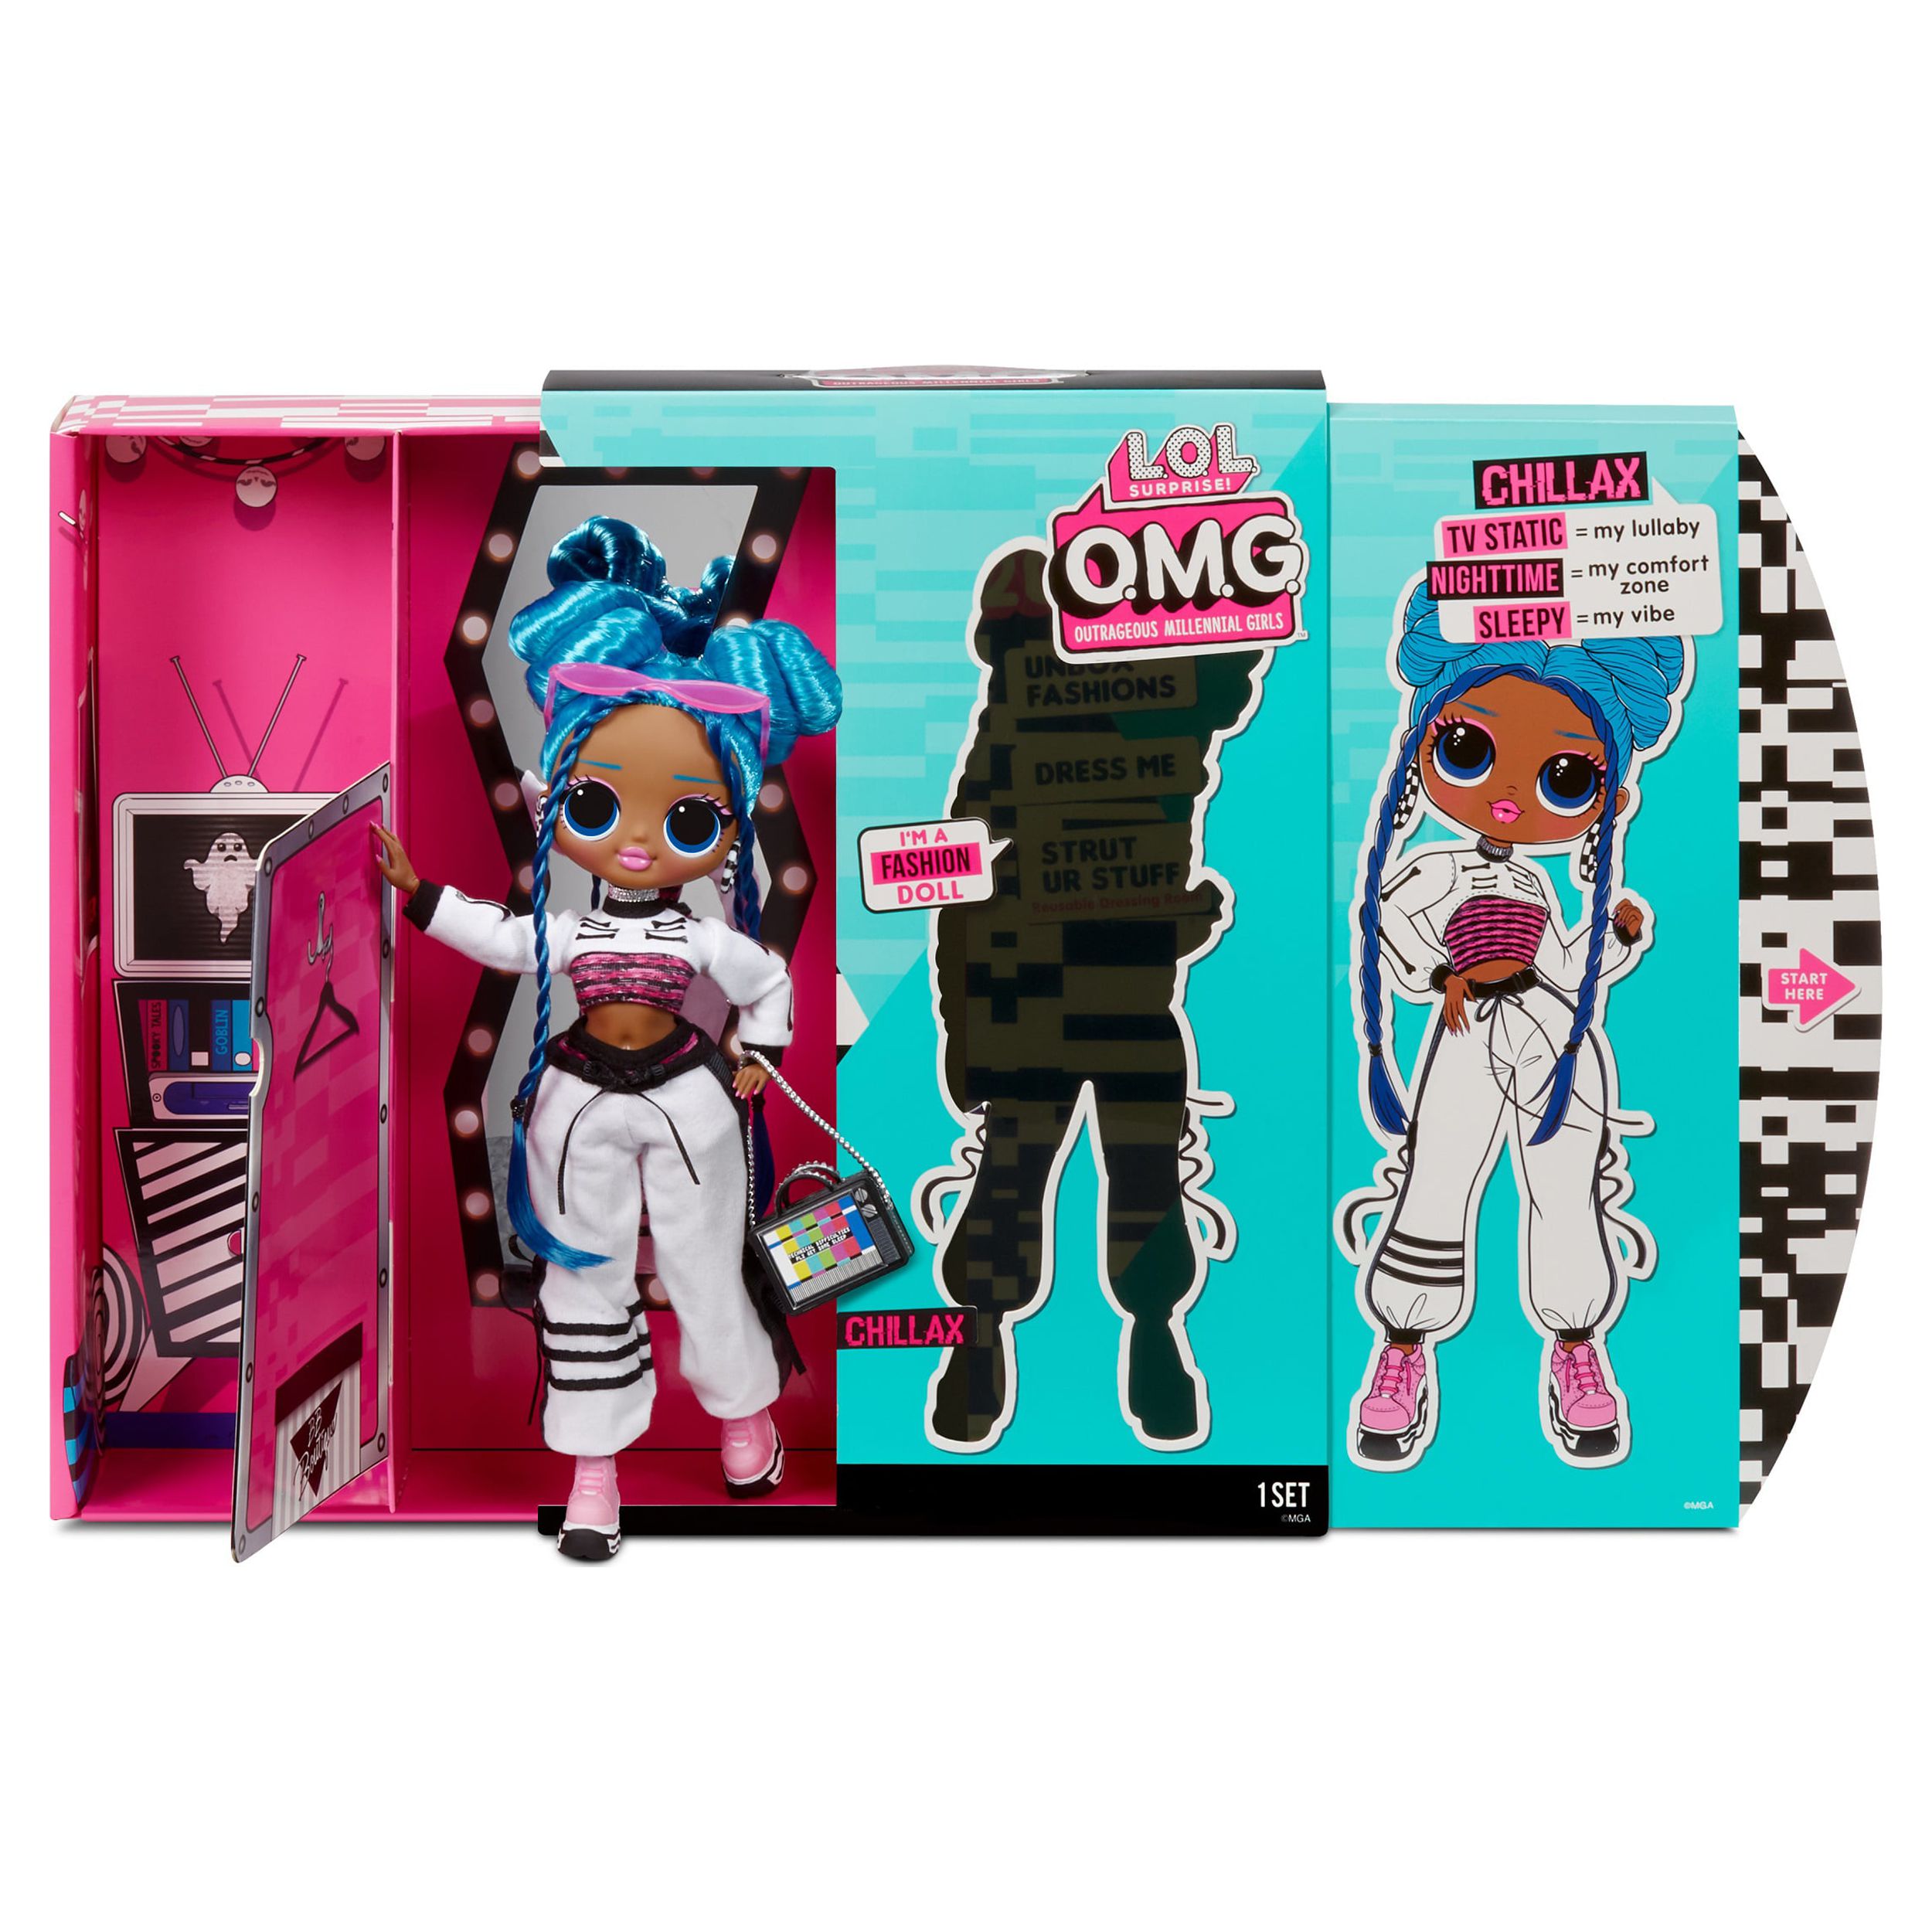 LOL Surprise OMG Series 3 Chillax Fashion Doll With 20 Surprises, Great Gift for Kids Ages 4 5 6+ - image 6 of 7